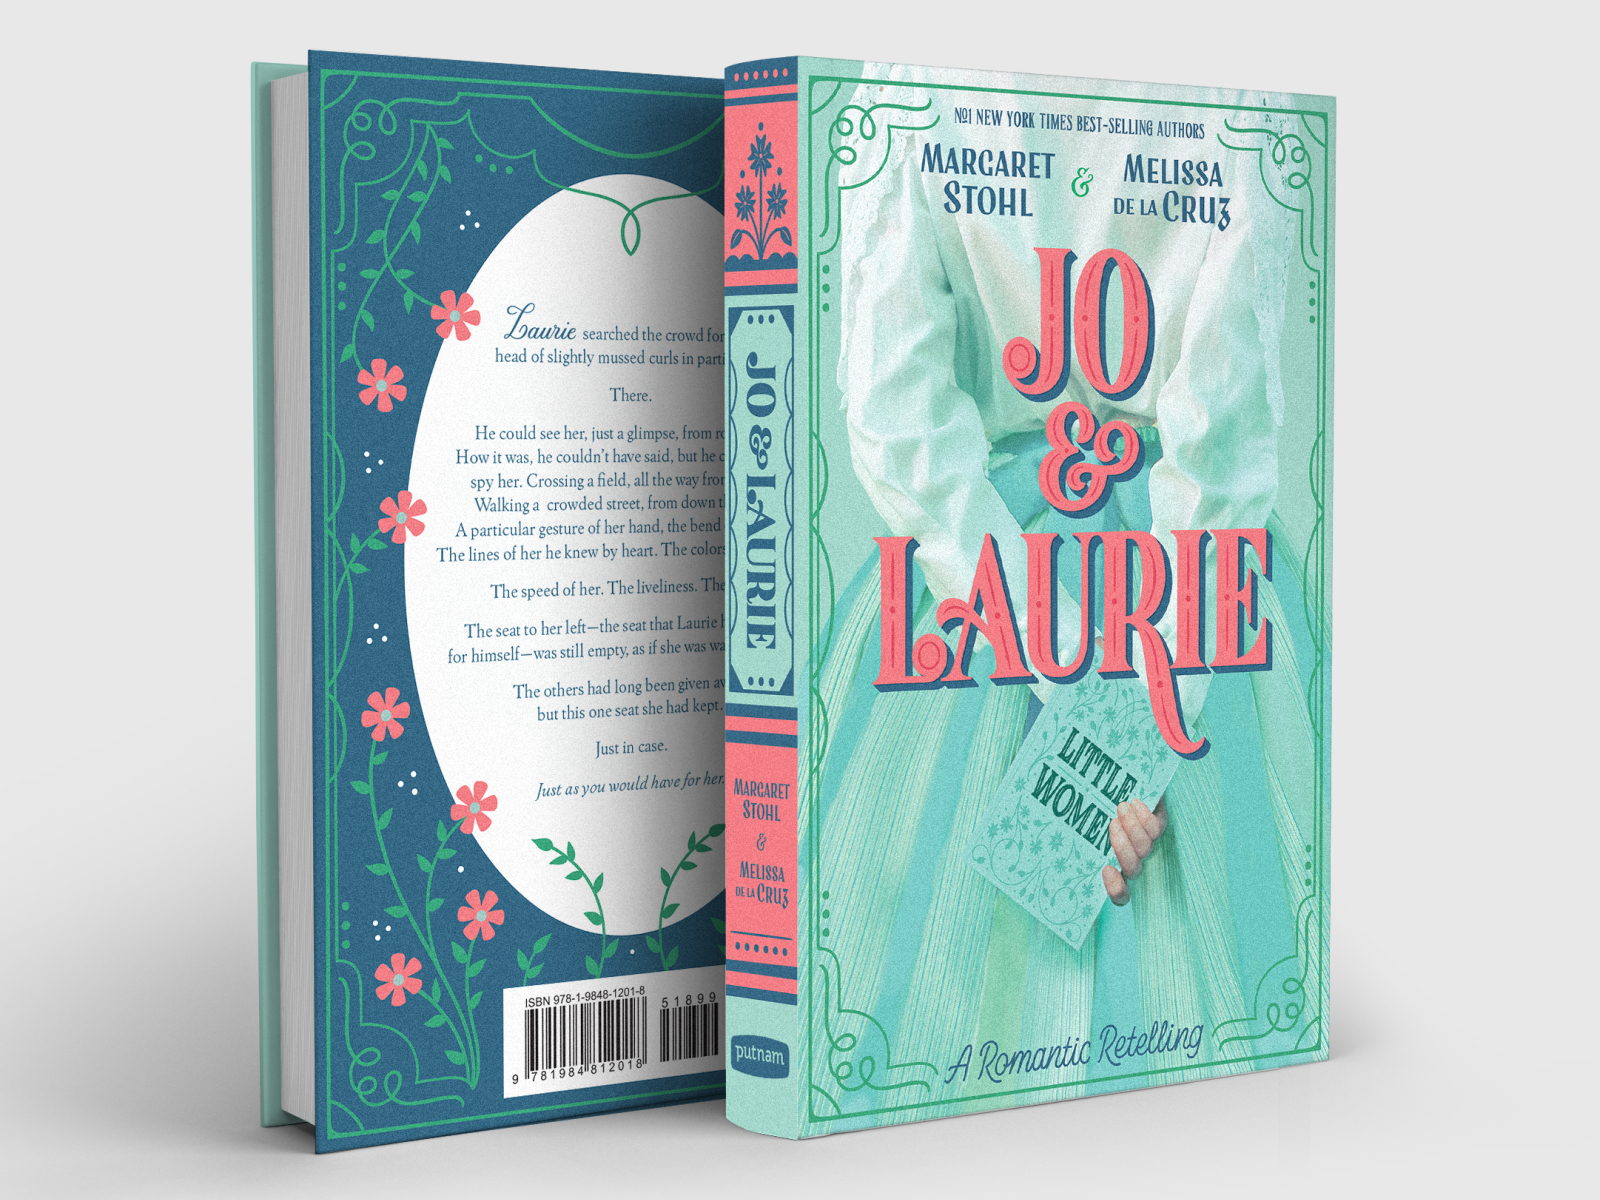 Jo & Laurie Book Jacket Design & Lettering by Katie Johnson on Dribbble